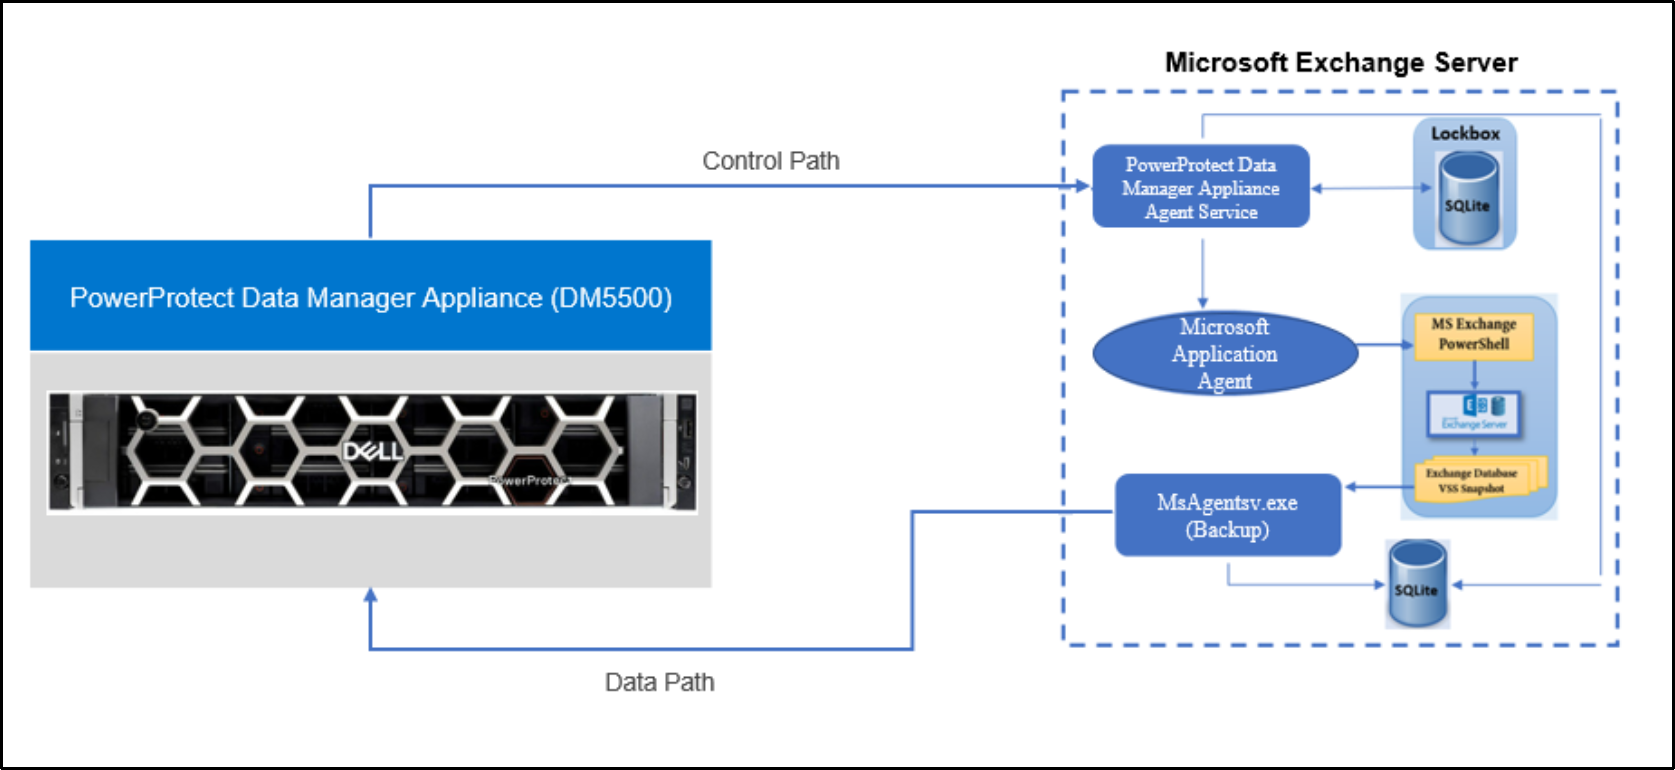 The image shows Exchange Server database protection with the Data Manager 